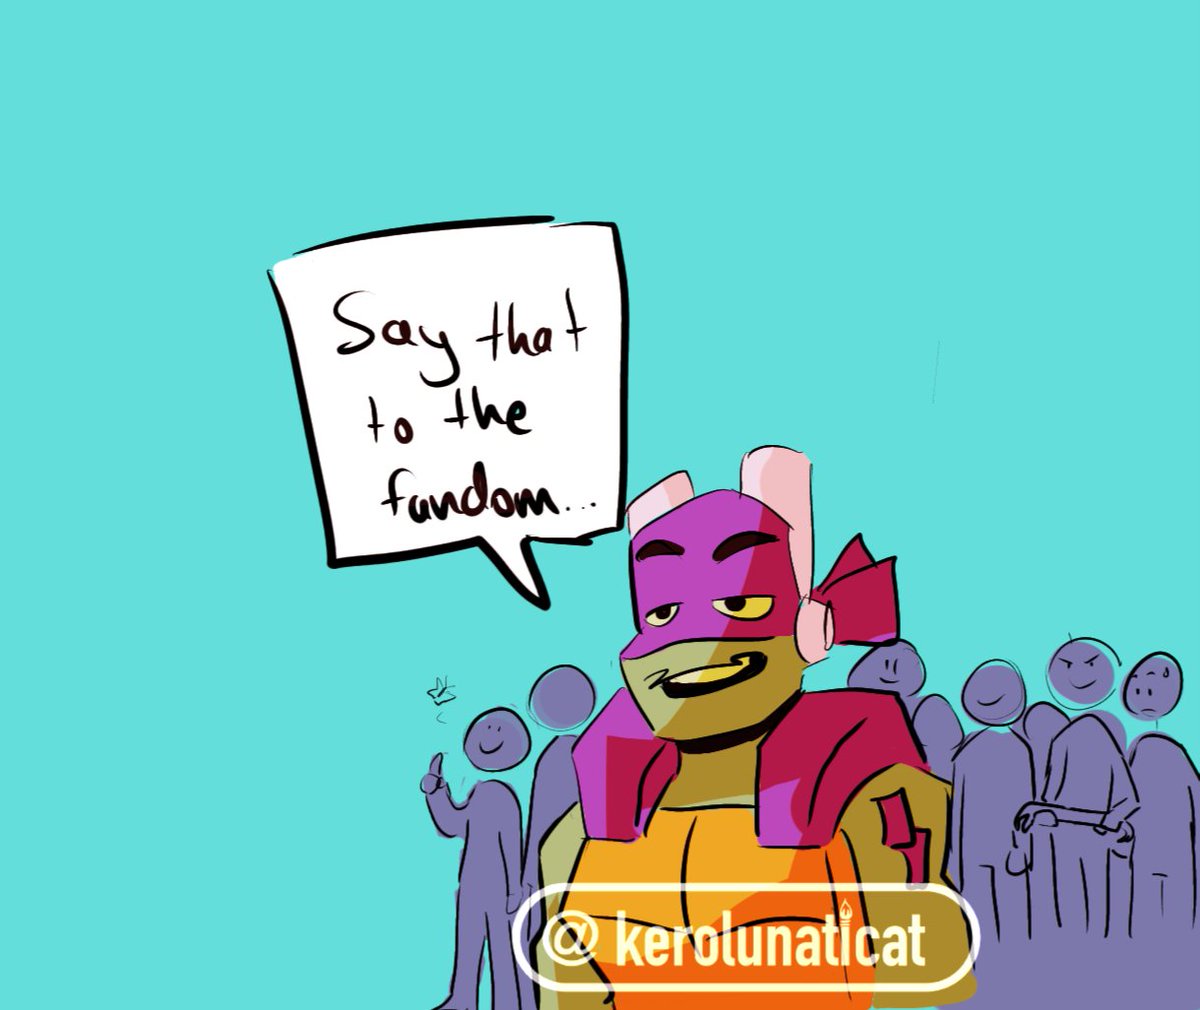 This  fandom is so wholesome and the interaction with the rottmnt crew is so special to me! I love you guys! #kerolunaticat #tmnt #saverottmnt #rottmnt #tmnt2018 #donatello #leonardo #disastertwins